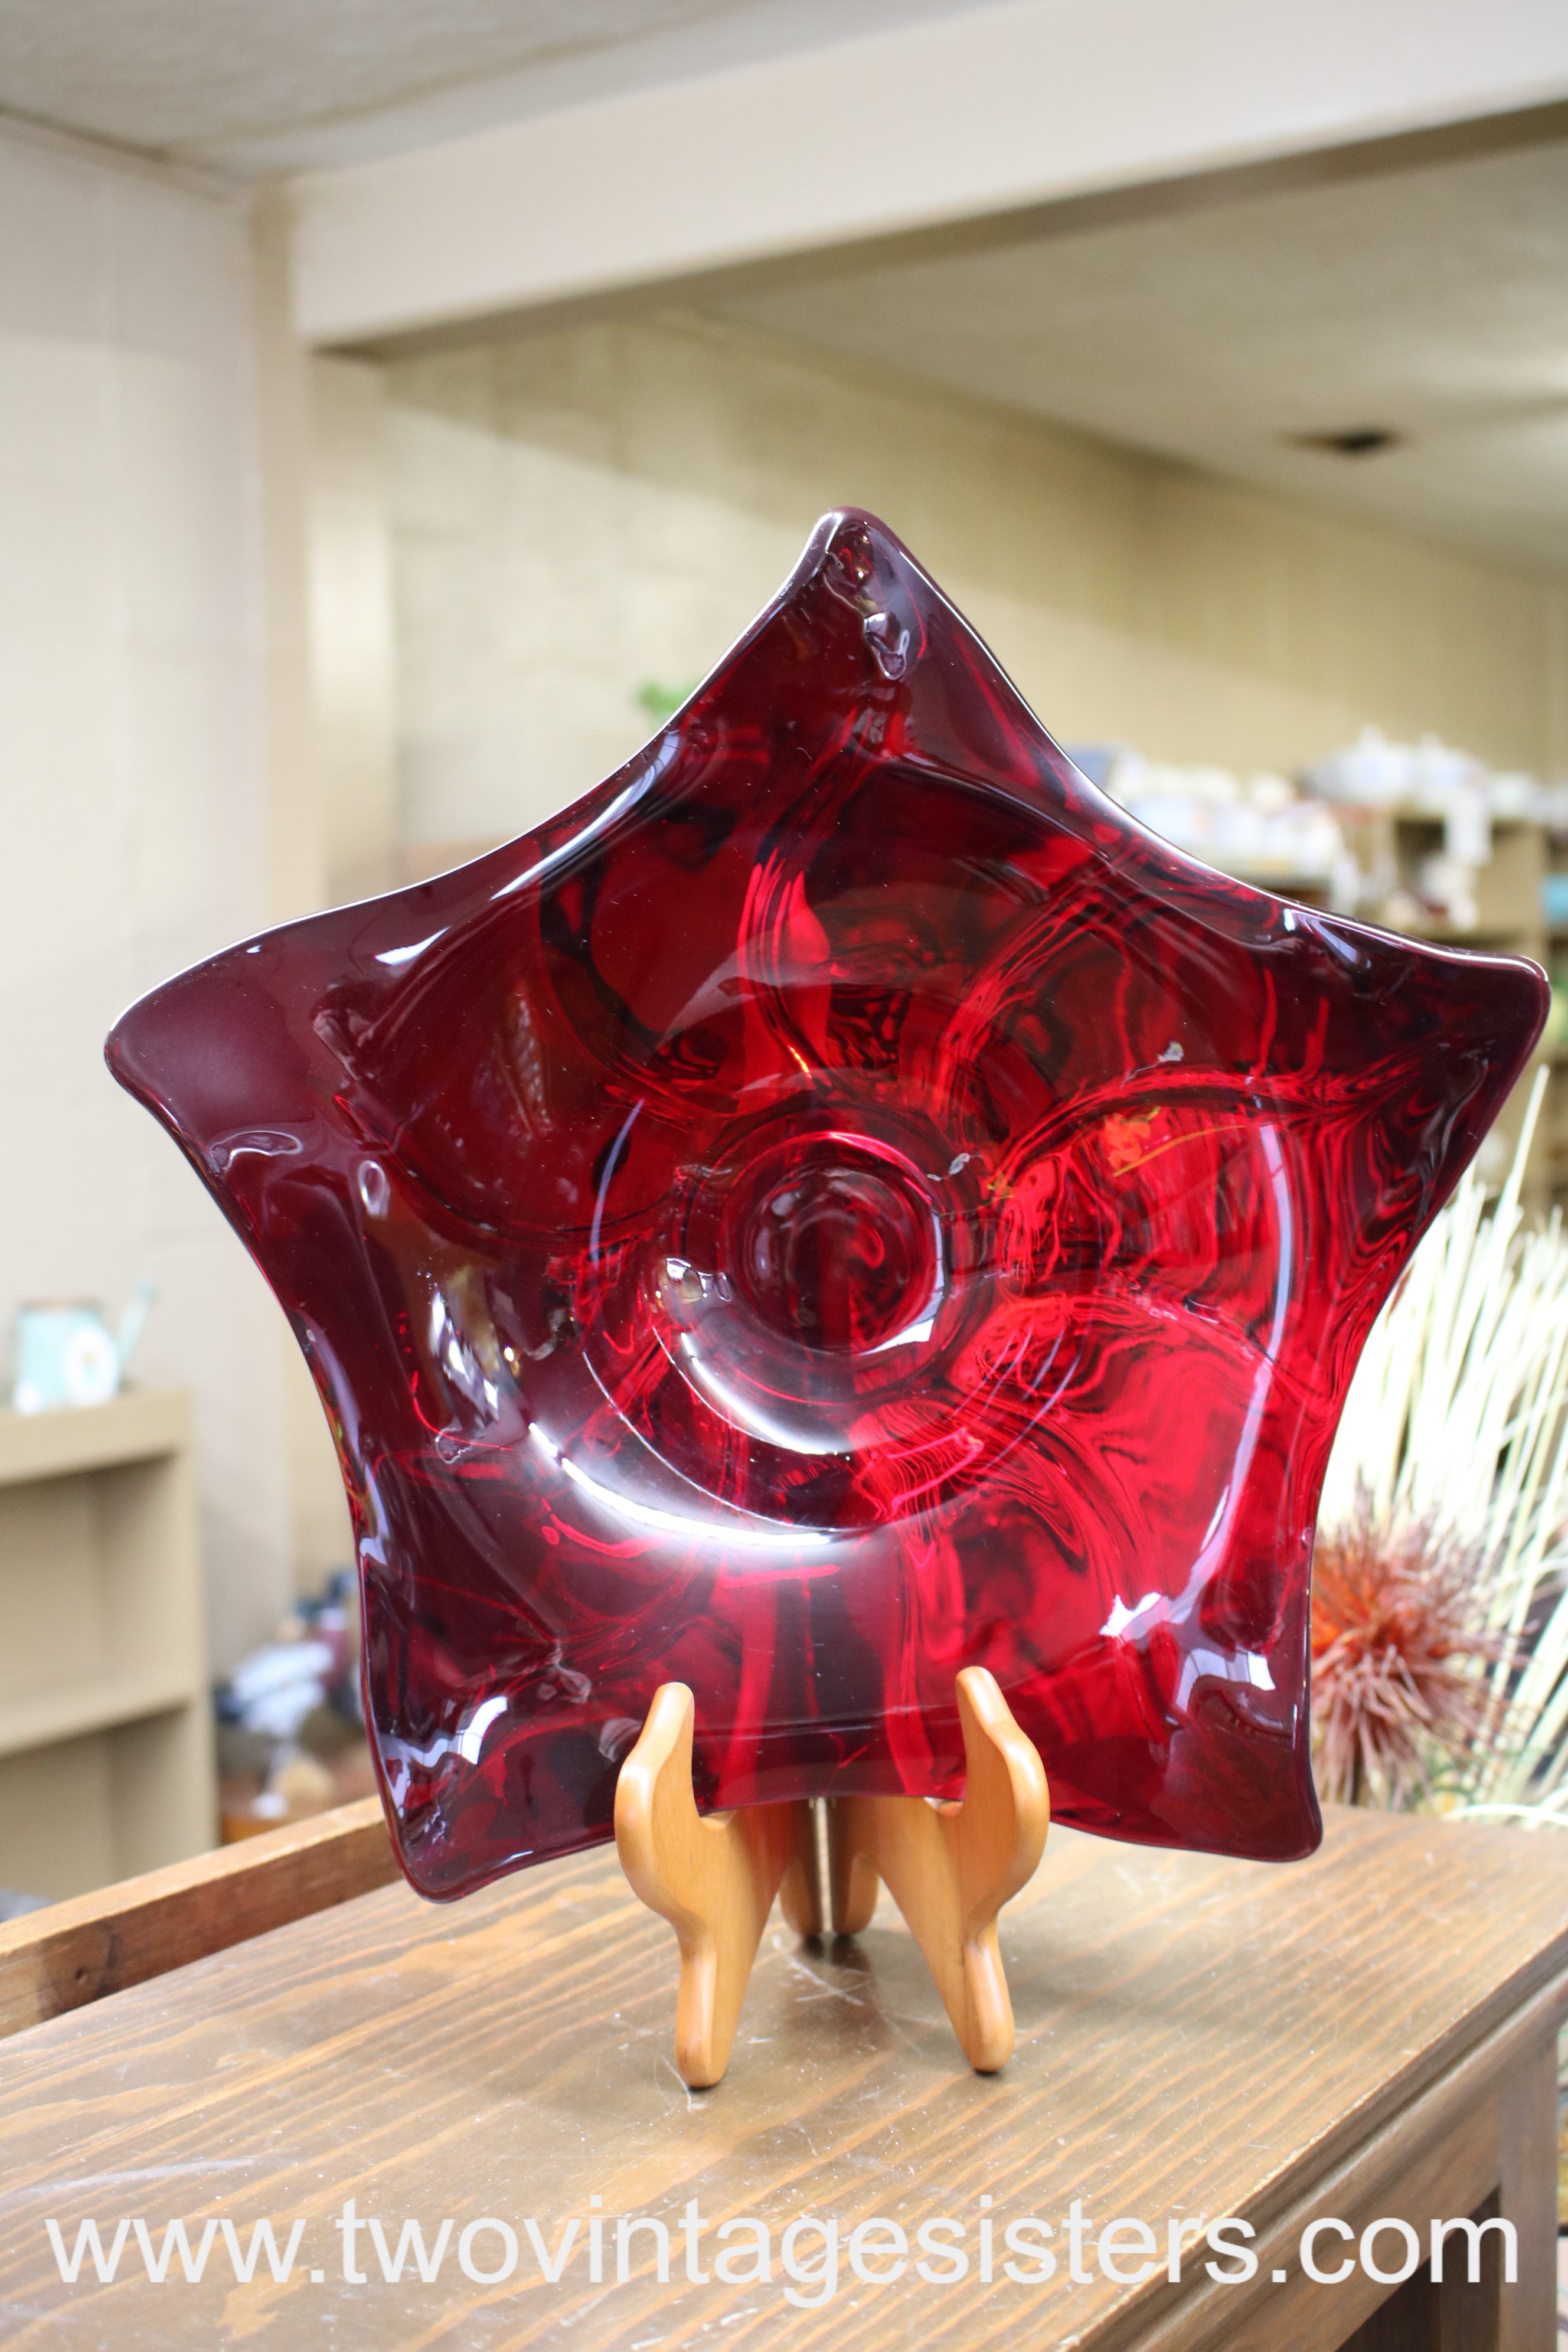 Ruby Red Carnival Glass Star and Arch Nappy Bowl